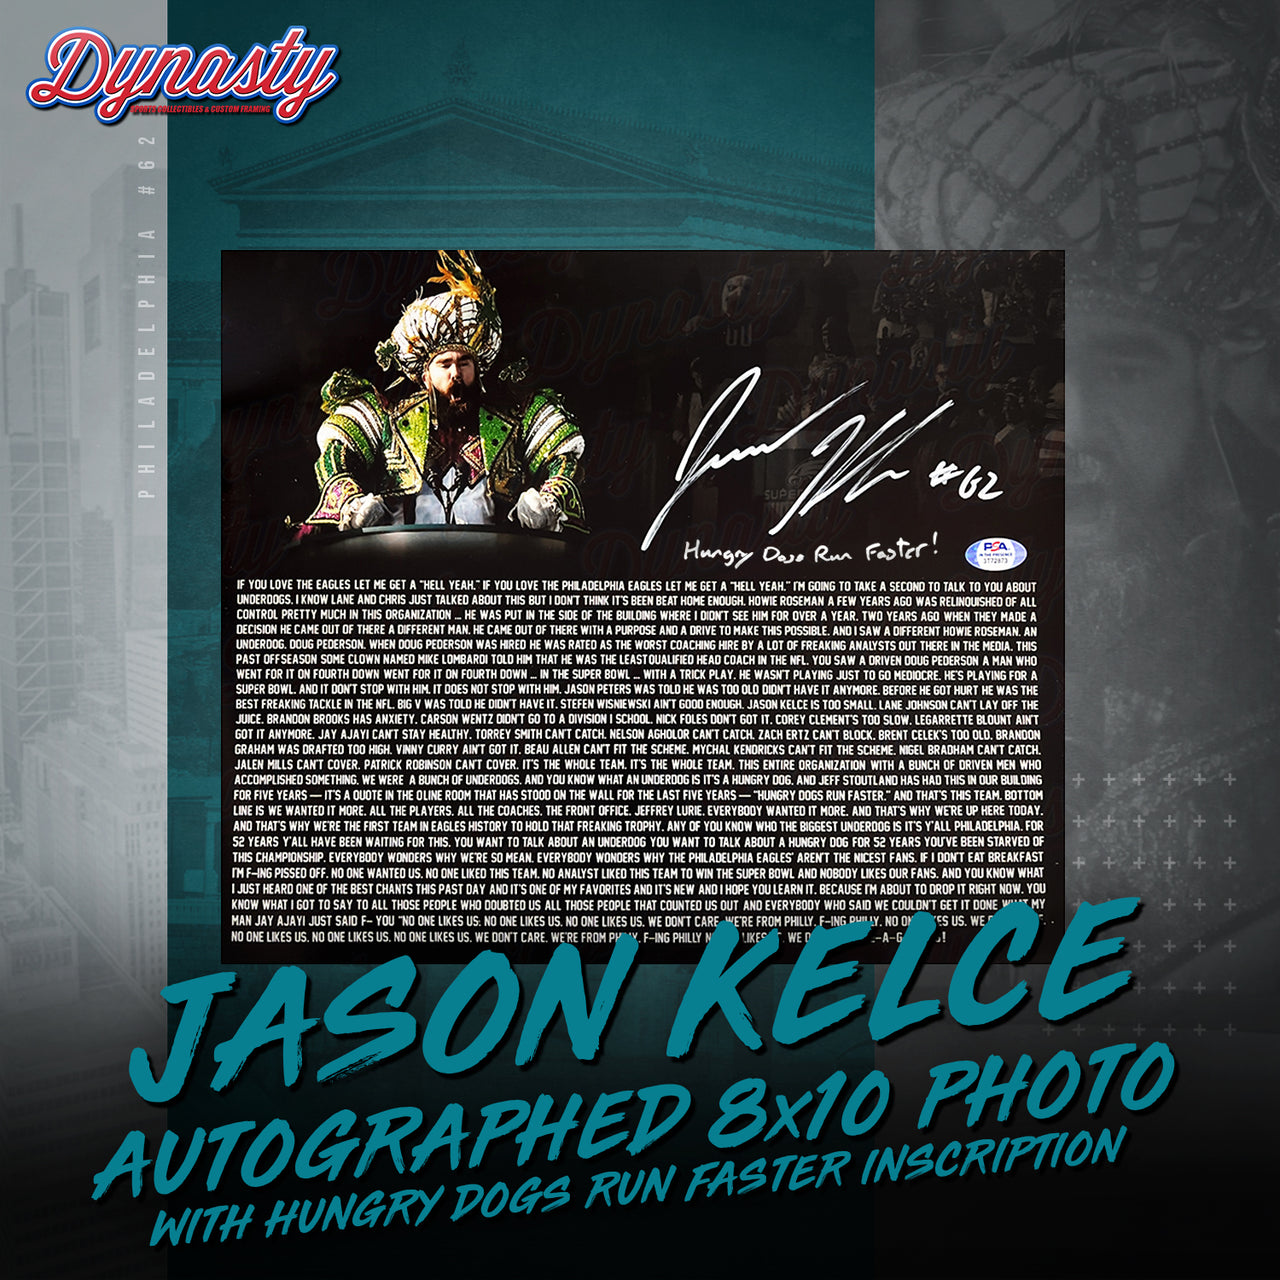 Jason Kelce Autographed Parade Speech Text Photo | Pre-Sale Opportunity - Dynasty Sports & Framing 